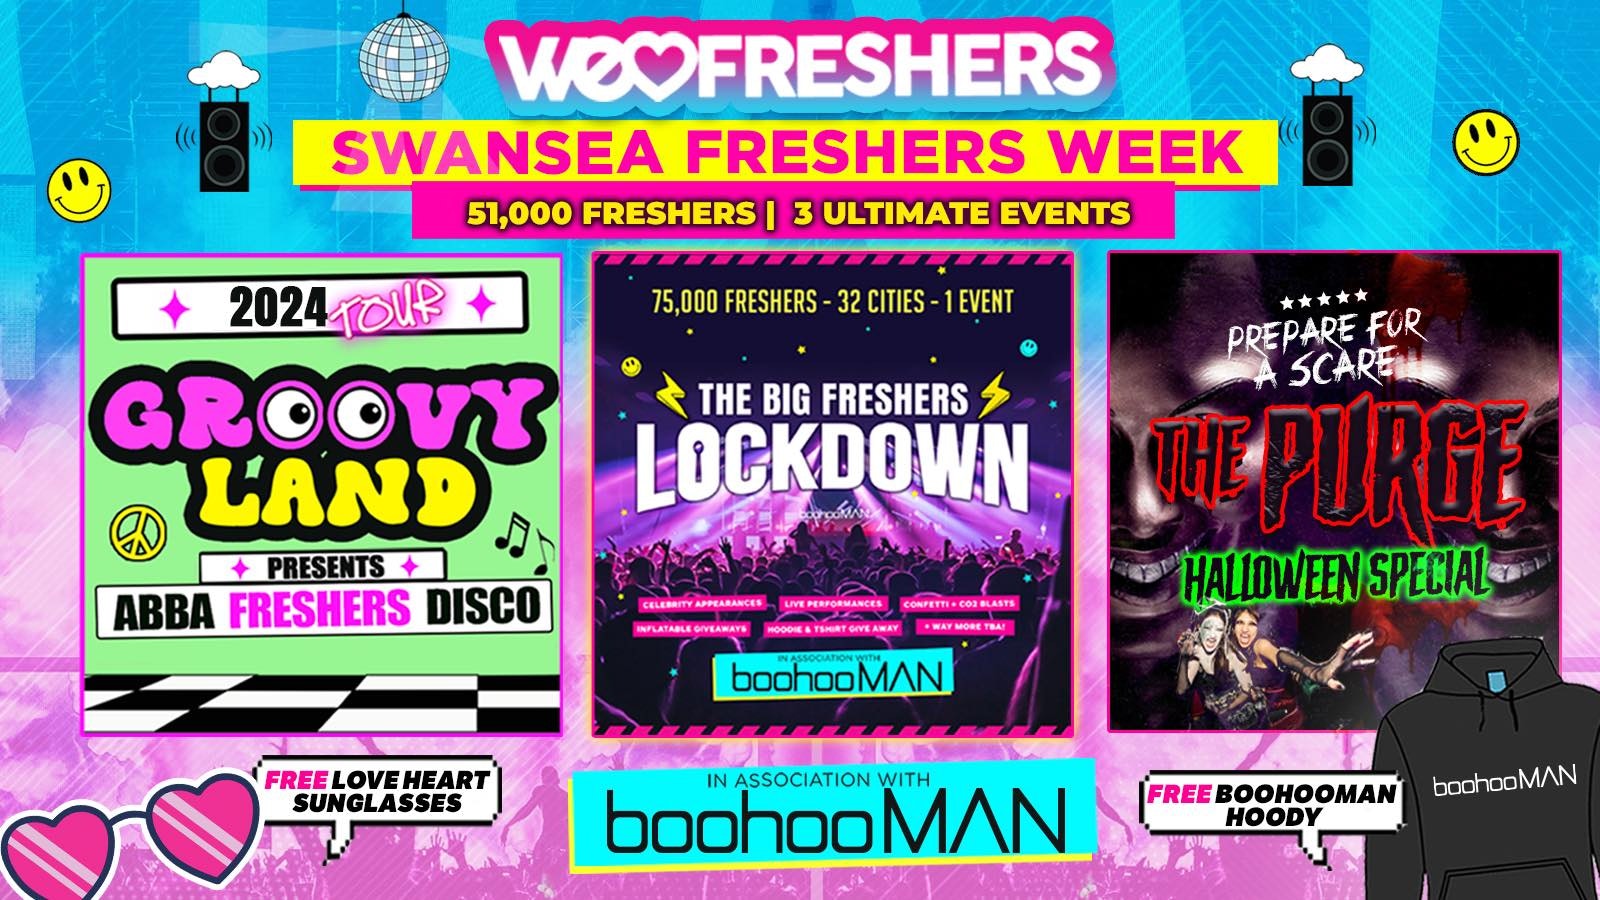 WE LOVE SWANSEA FRESHERS 2024 in association with boohooMAN – 3 EVENTS❗